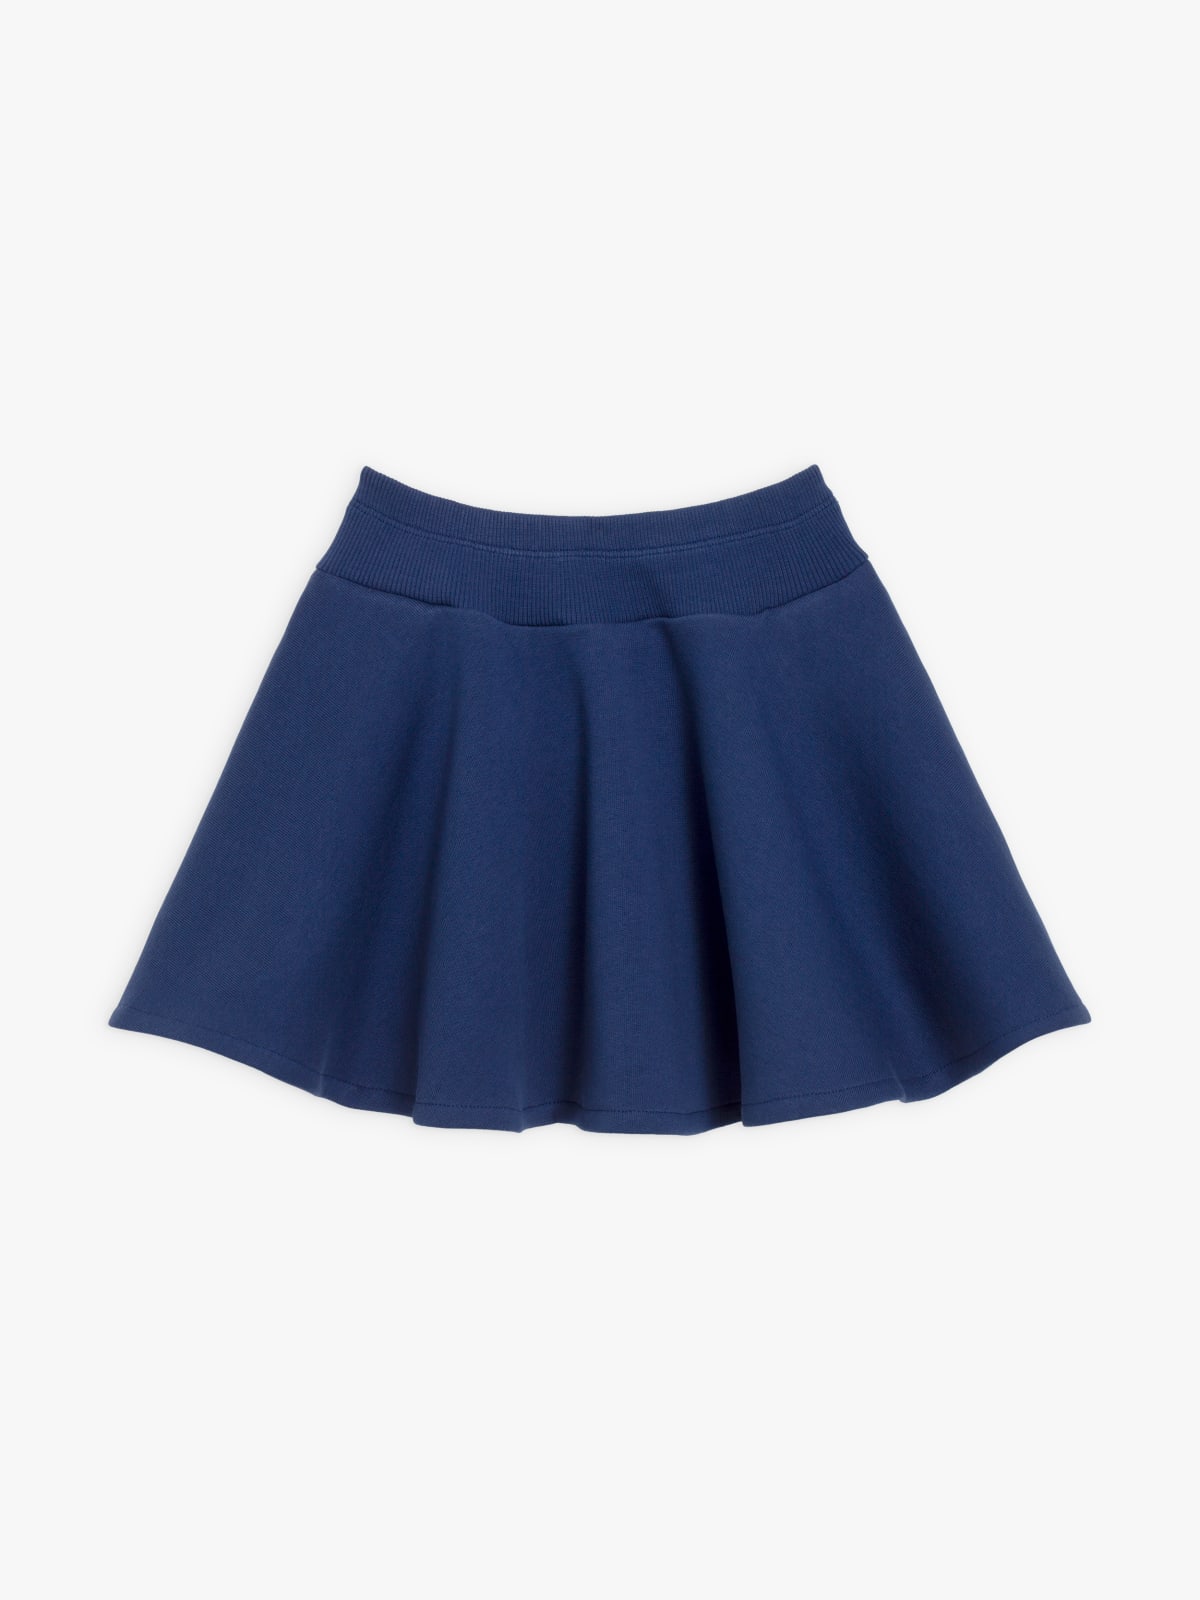 blue Cyclone skirt with red cotton fleece pockets